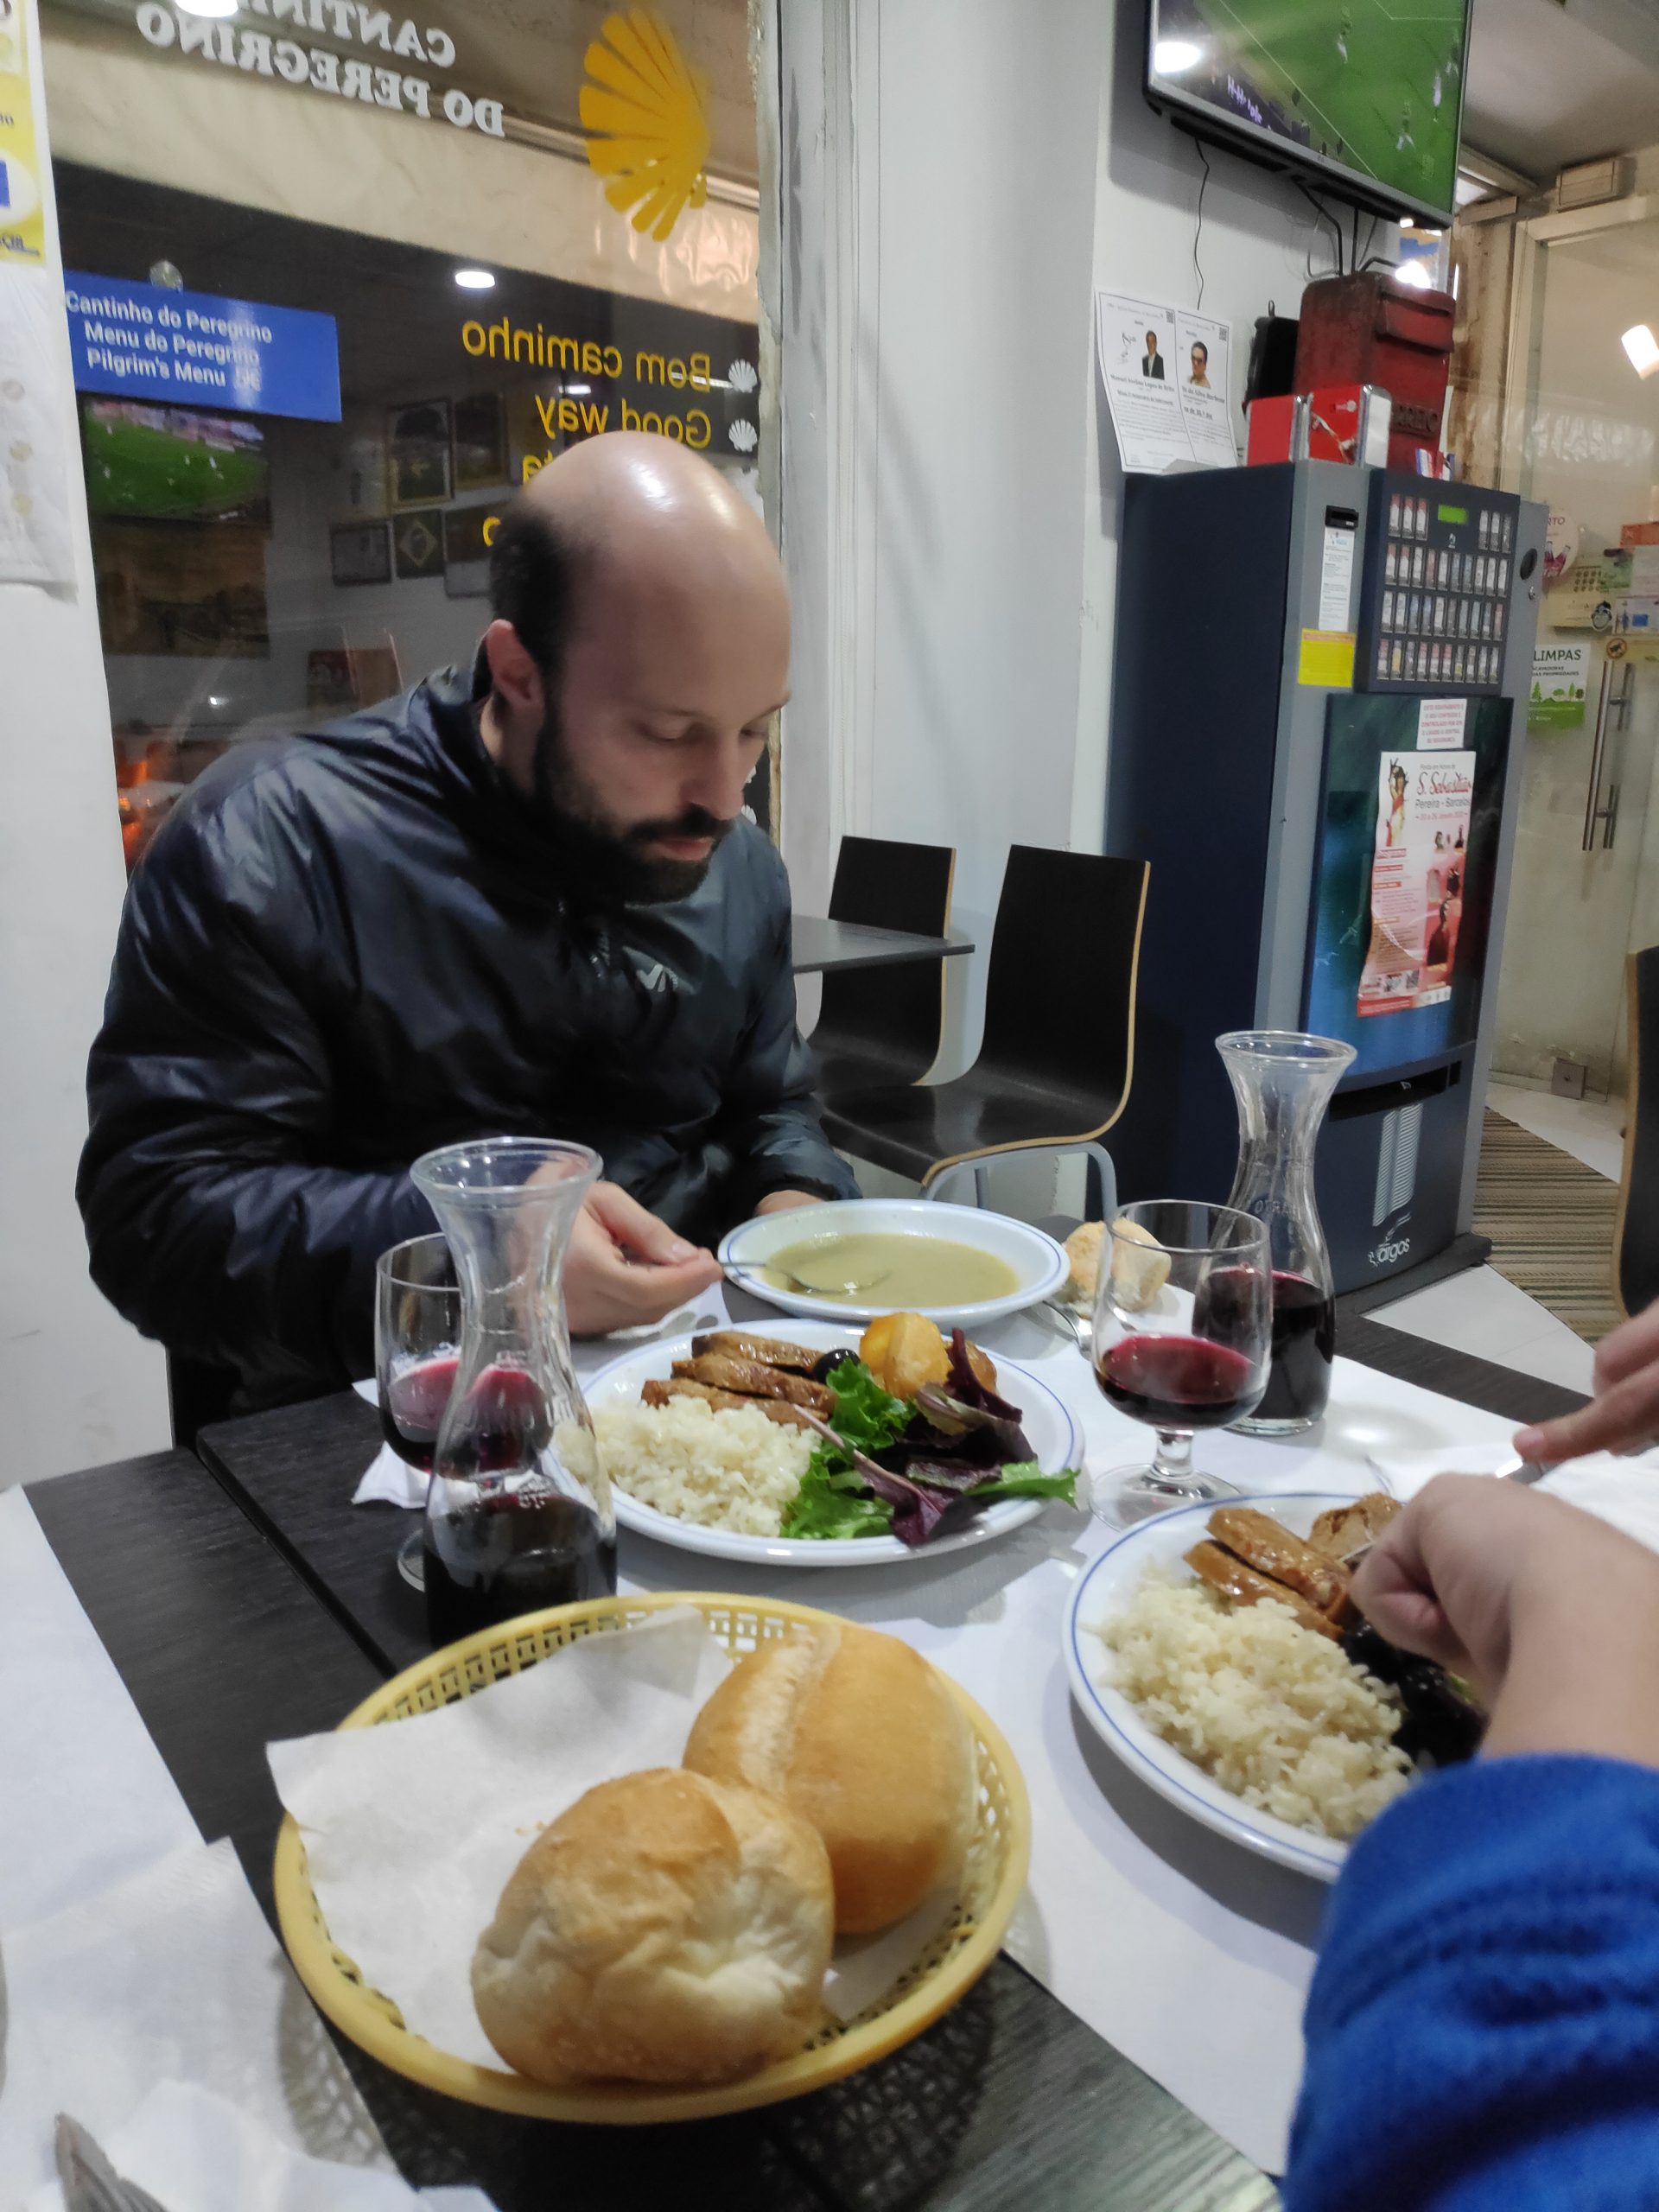 In the evening we had dinner for pilgrims, it was surprisingly good and cheap.